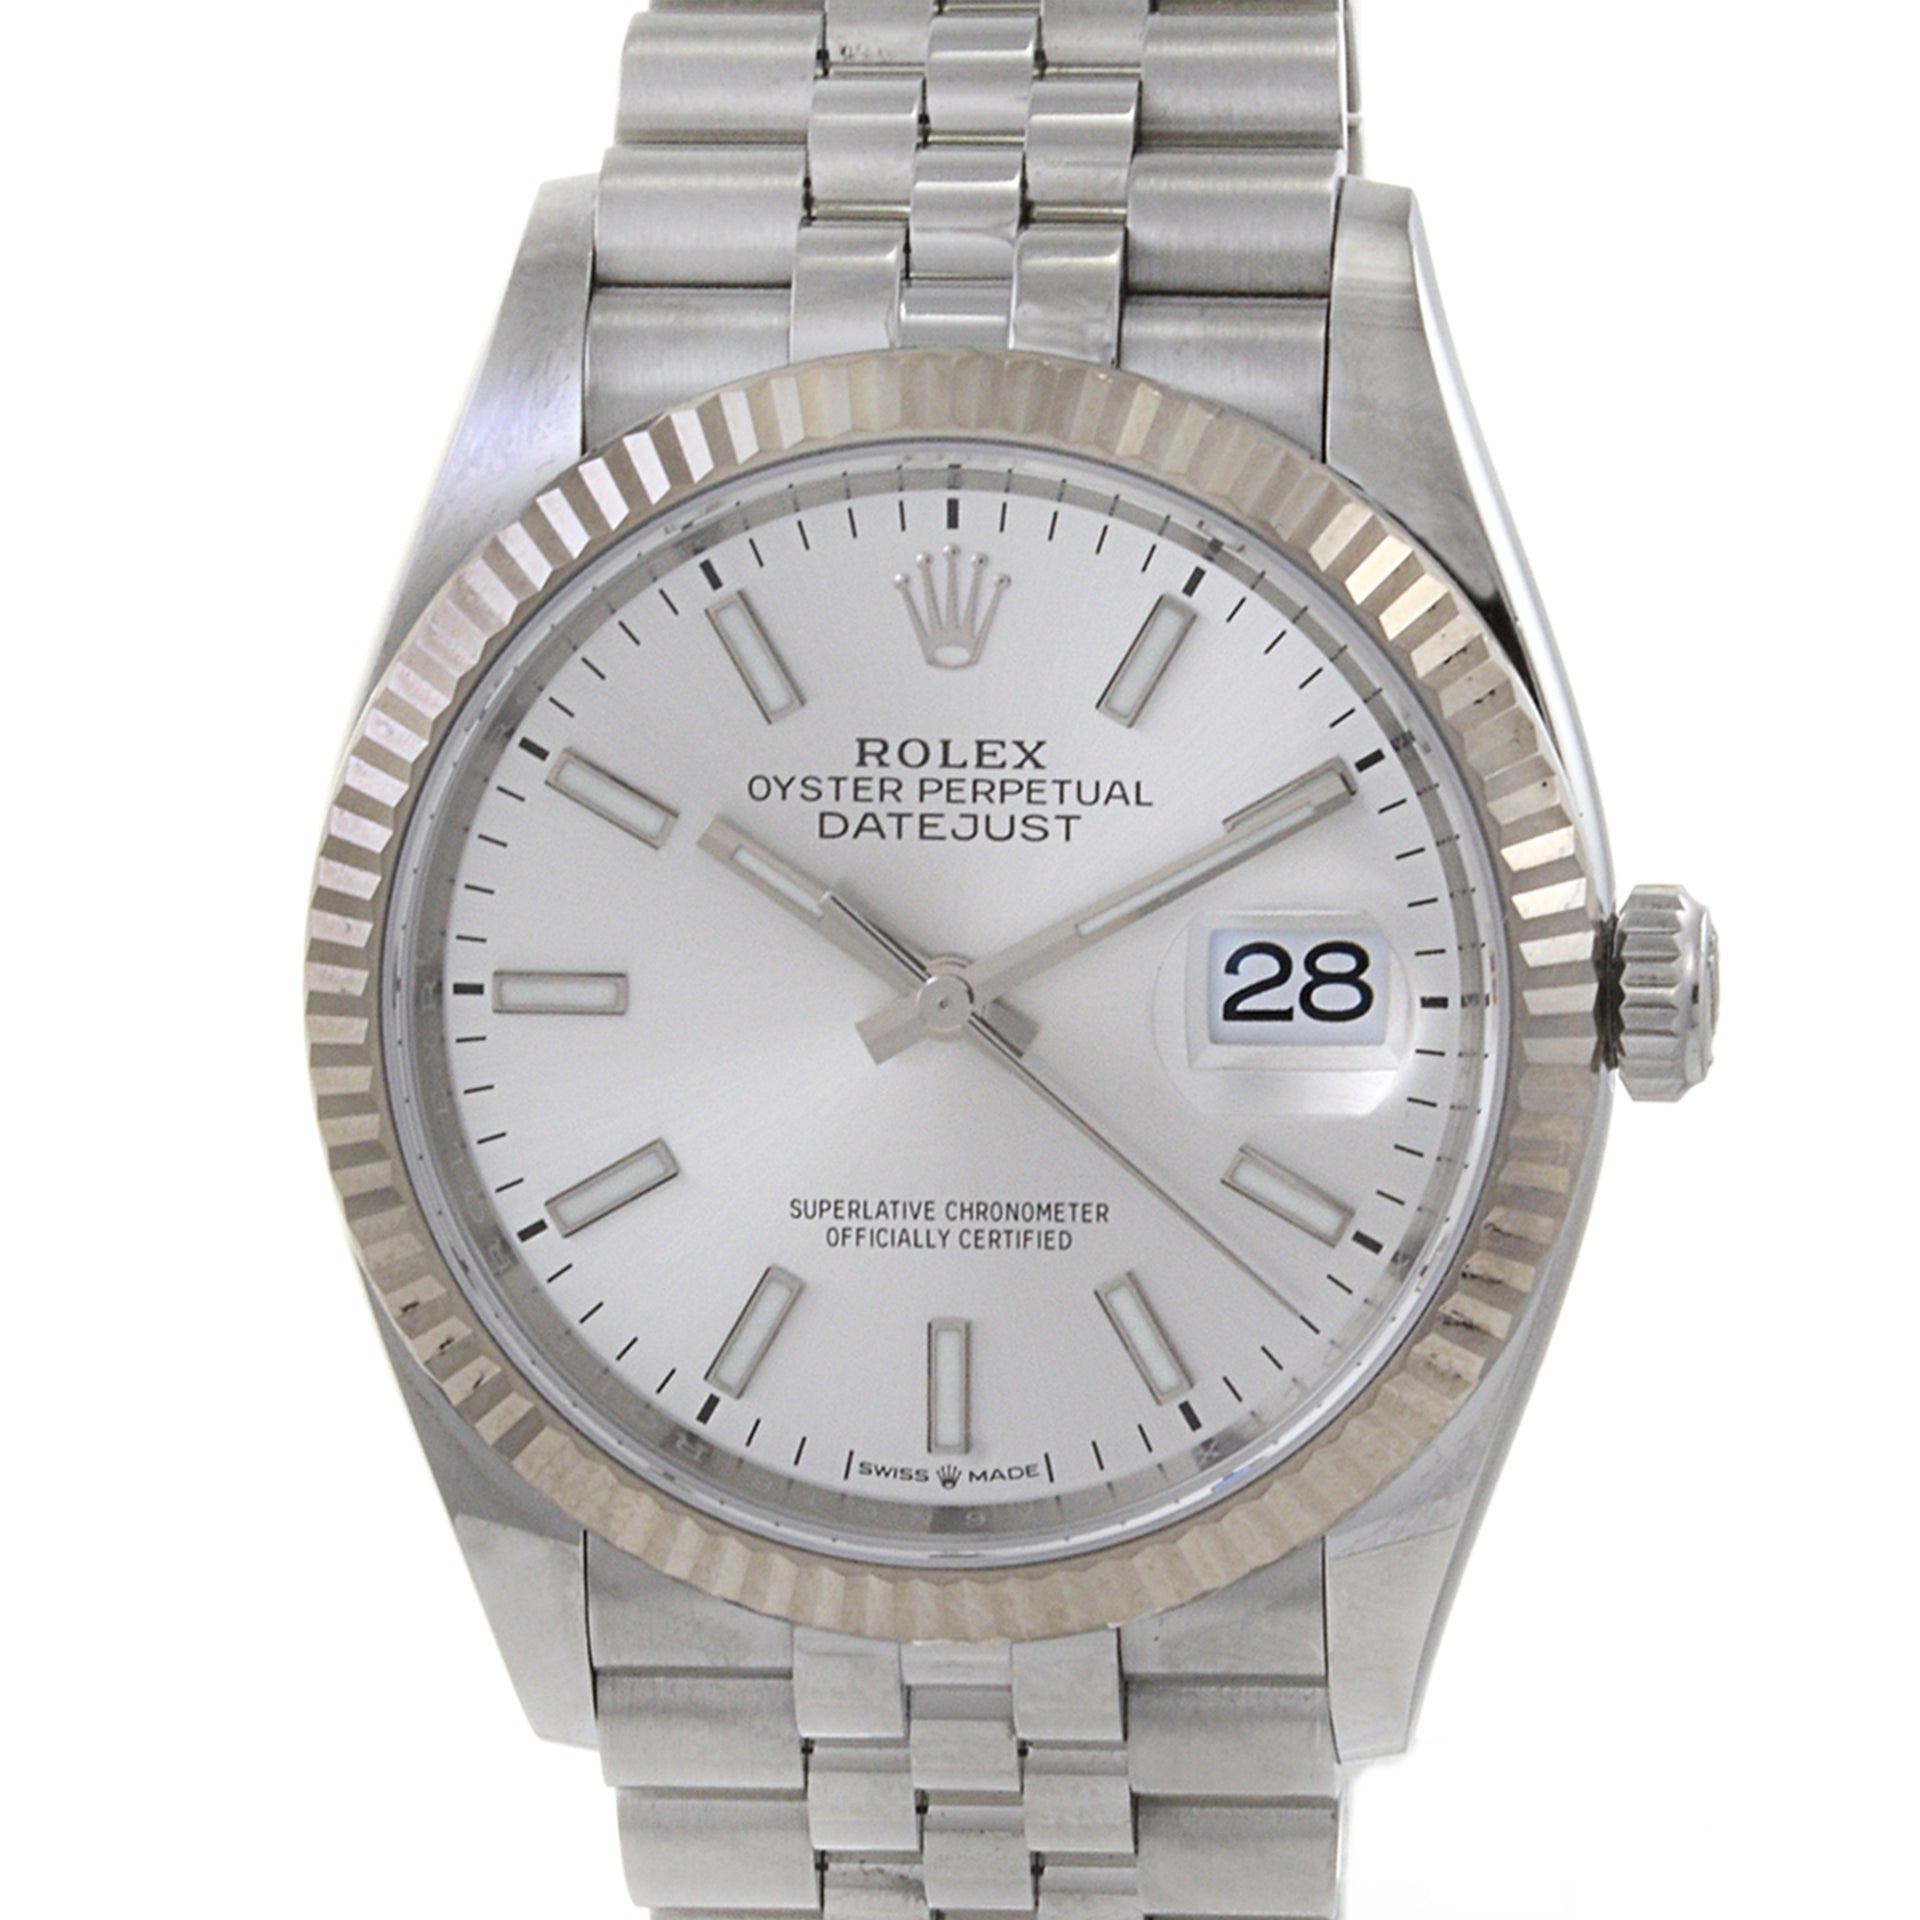 Rolex Datejust 36 Reference 126234 Stainless Steel and 18K White Gold